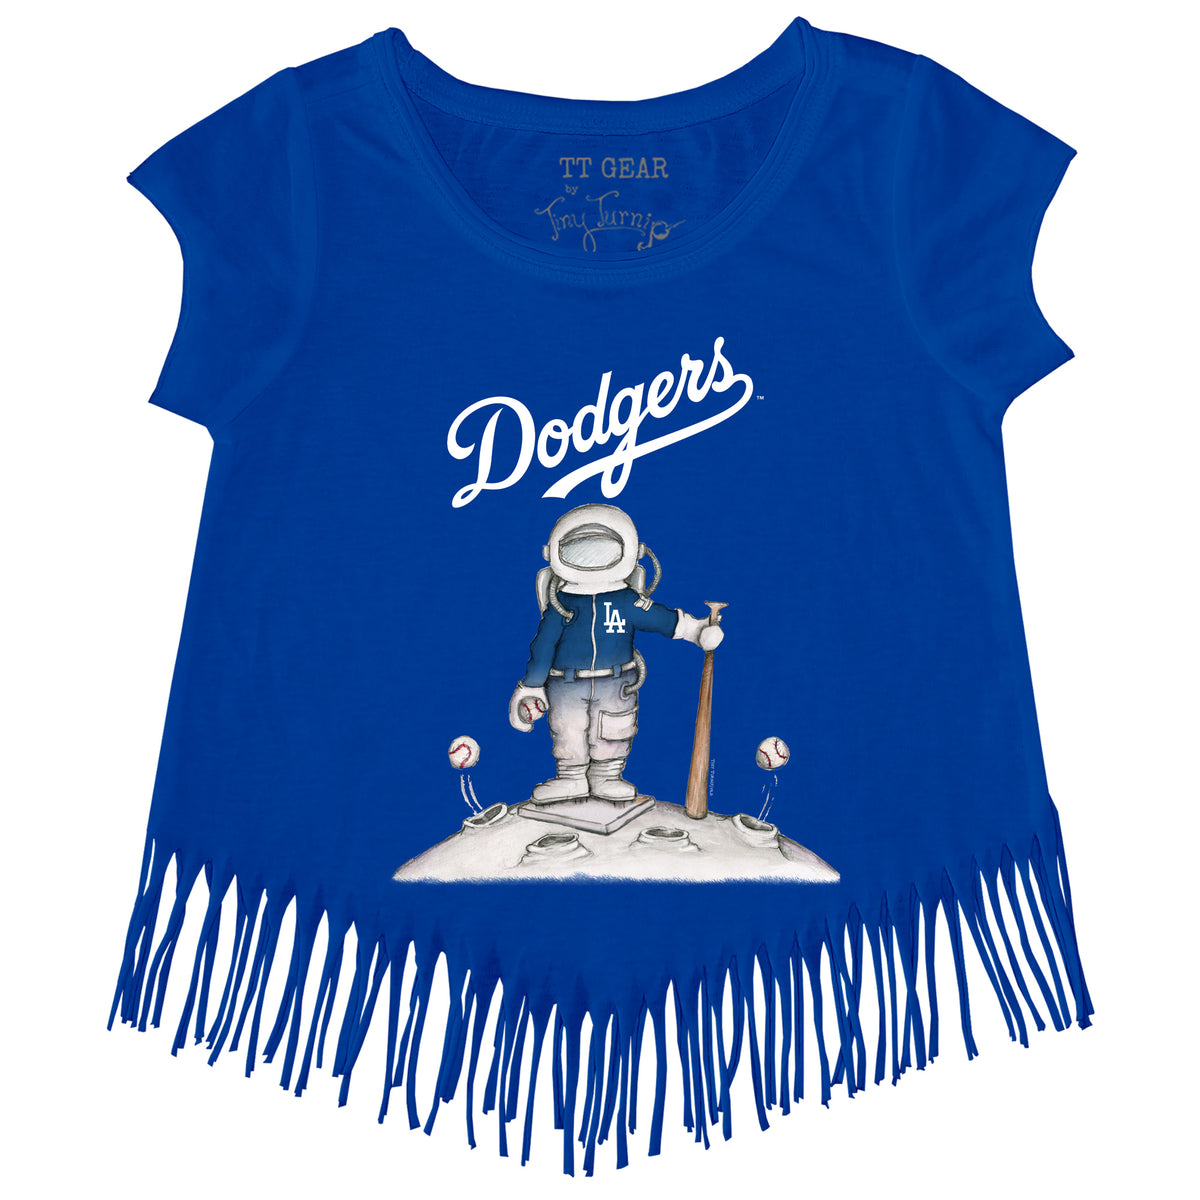 Los Angeles Dodgers Astronaut Fringe Tee Youth XL (14) / Royal Blue